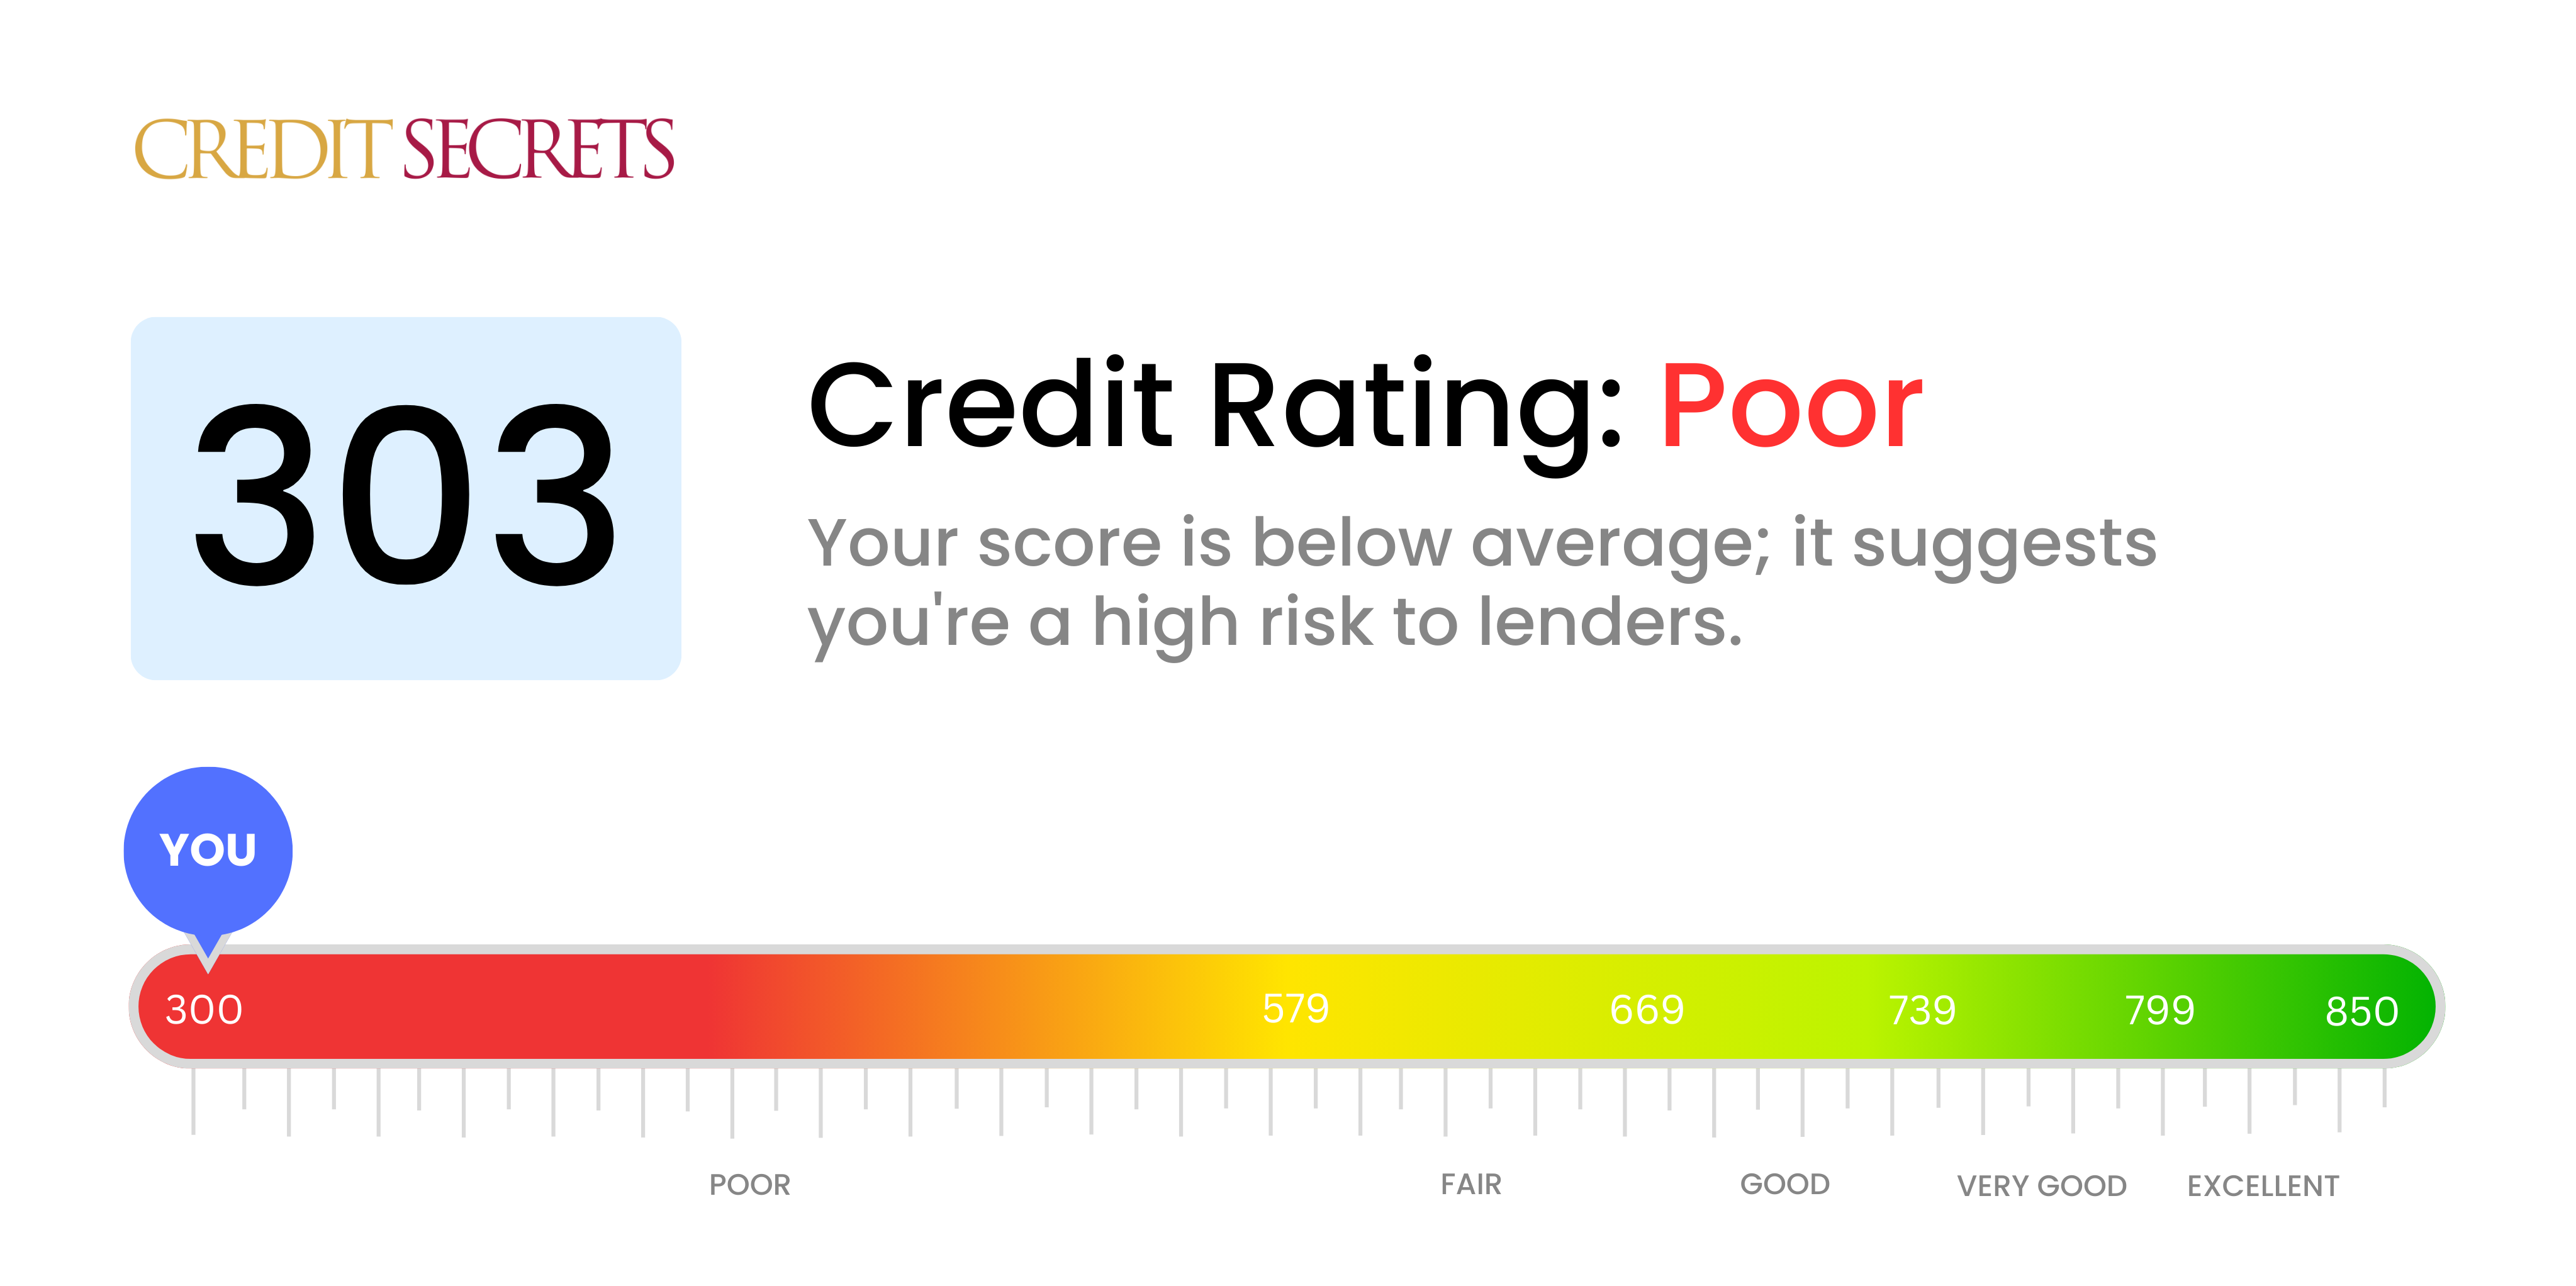 Is 303 a good credit score?